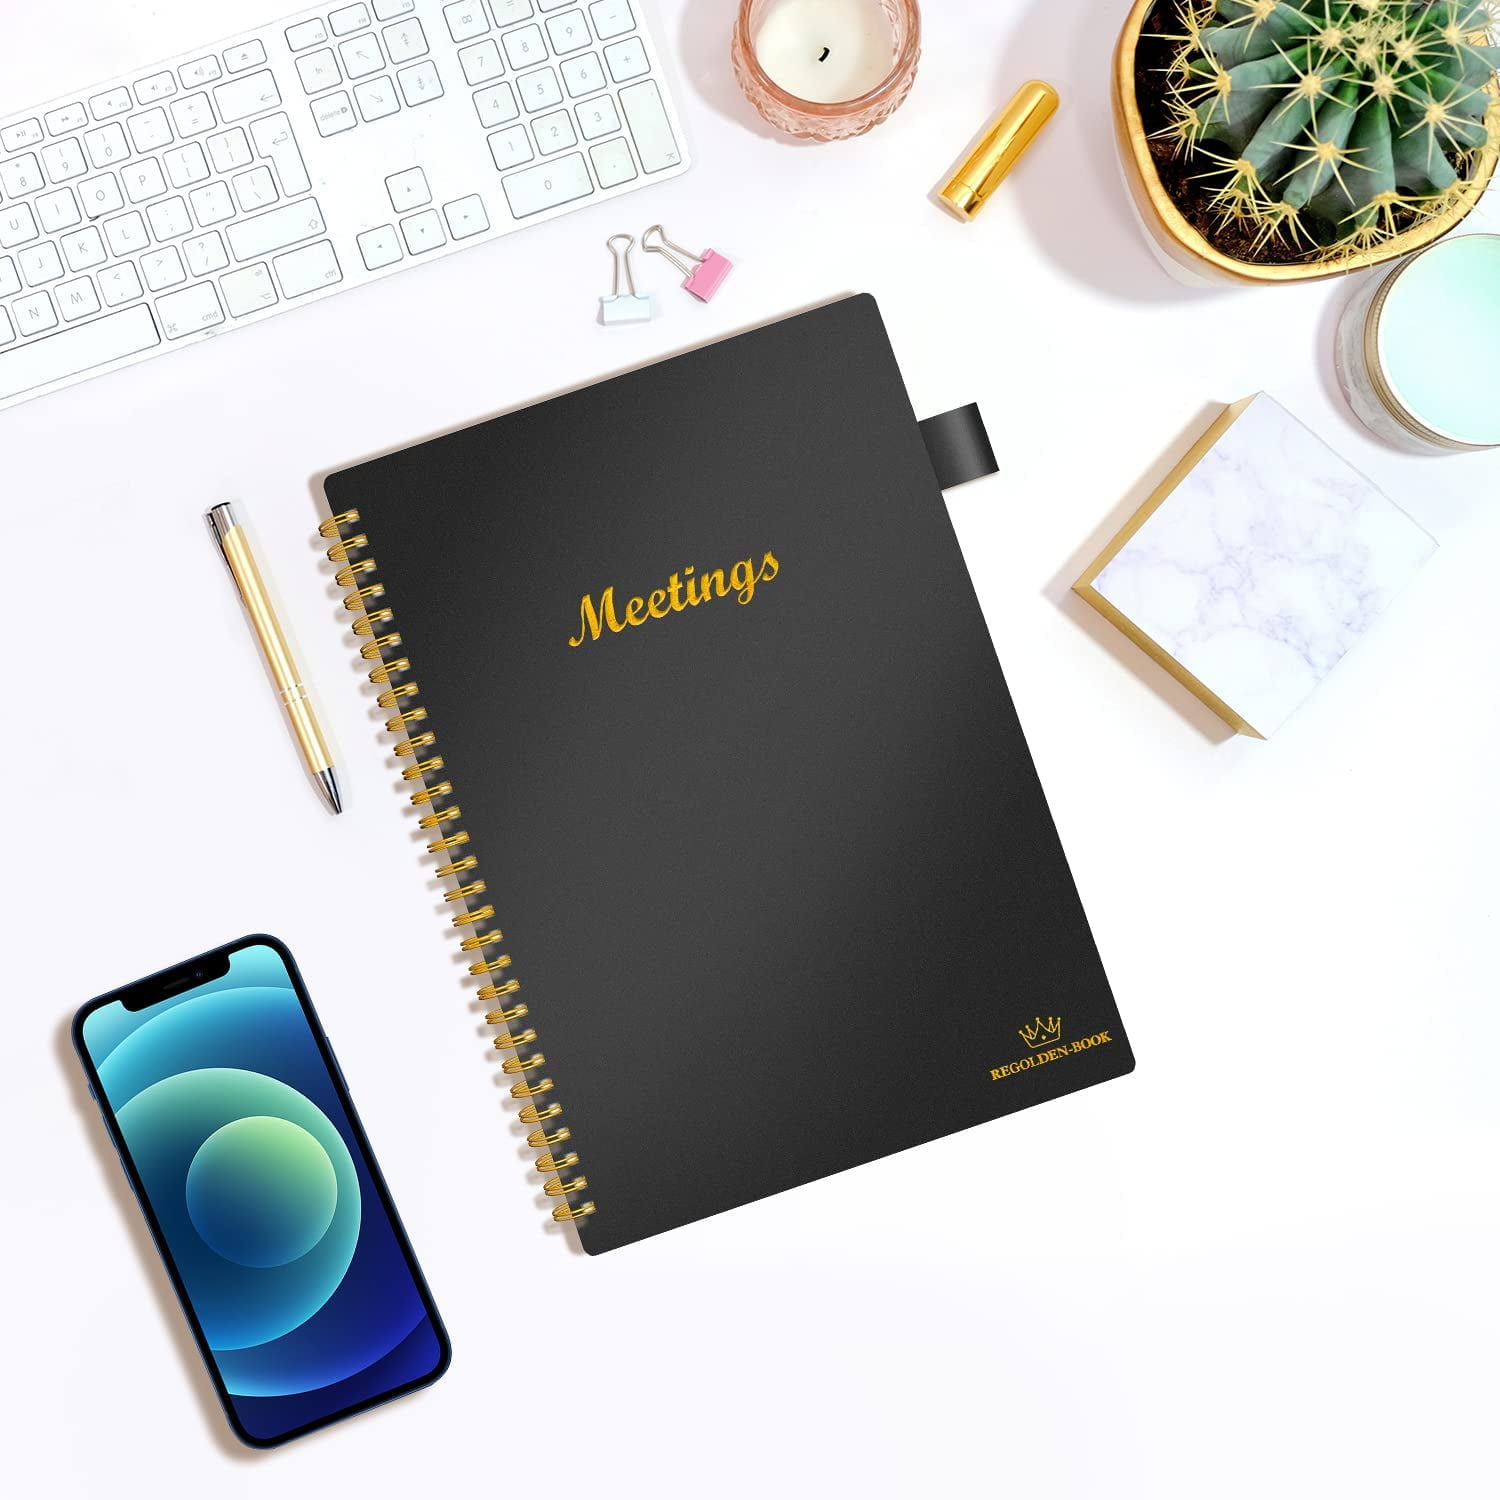  Forvencer Meeting Notebook for Work with Action Items, B5  Hardcover Project Planner Agenda Organizer for Note Taking, Office/Business  Supplies for Women Men, 160 Pages, 7x10, Black : Office Products